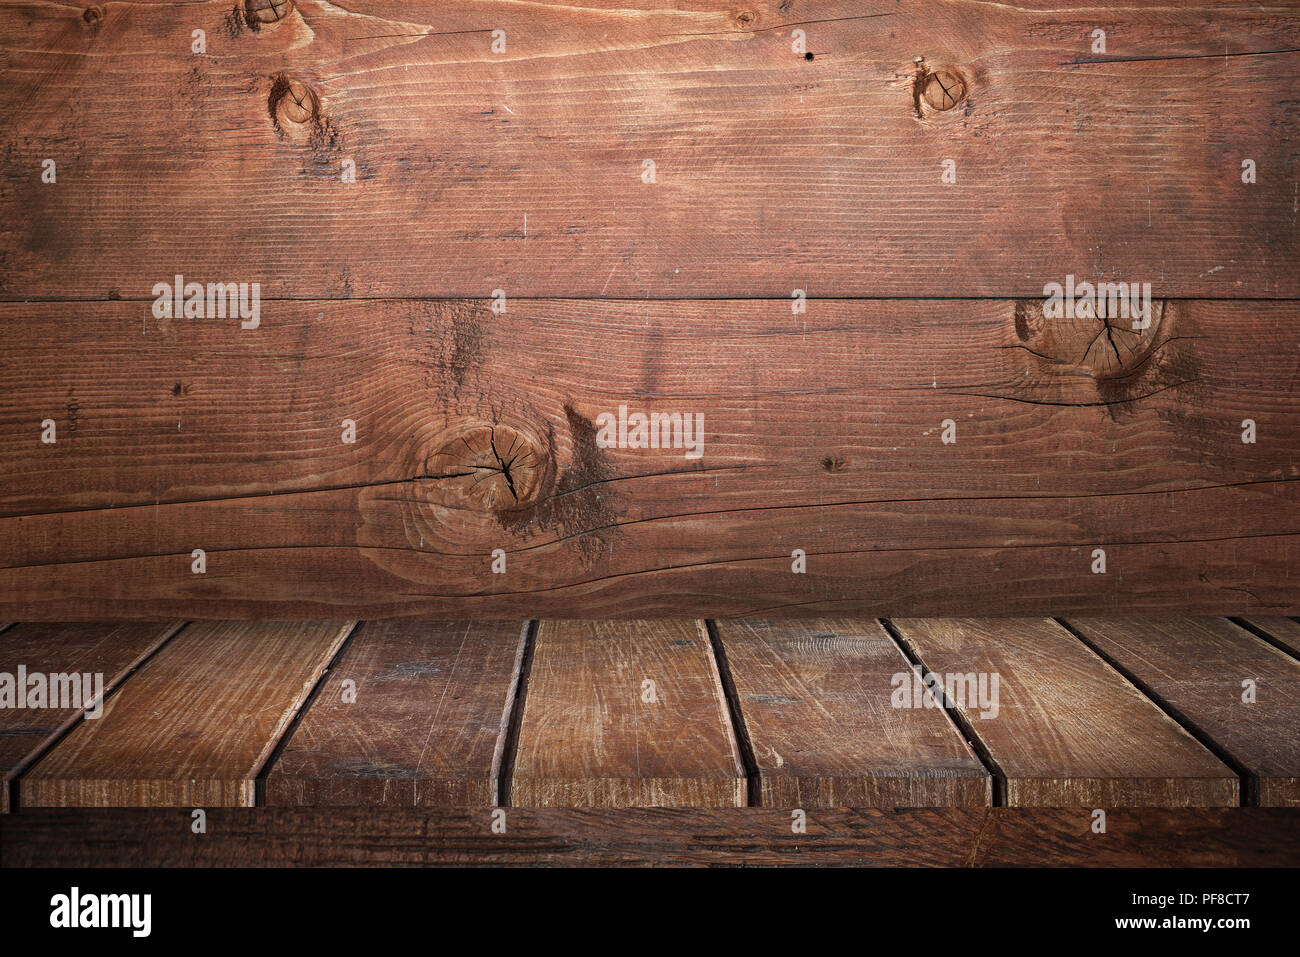 background of barrel and worn old table of wood Stock Photo